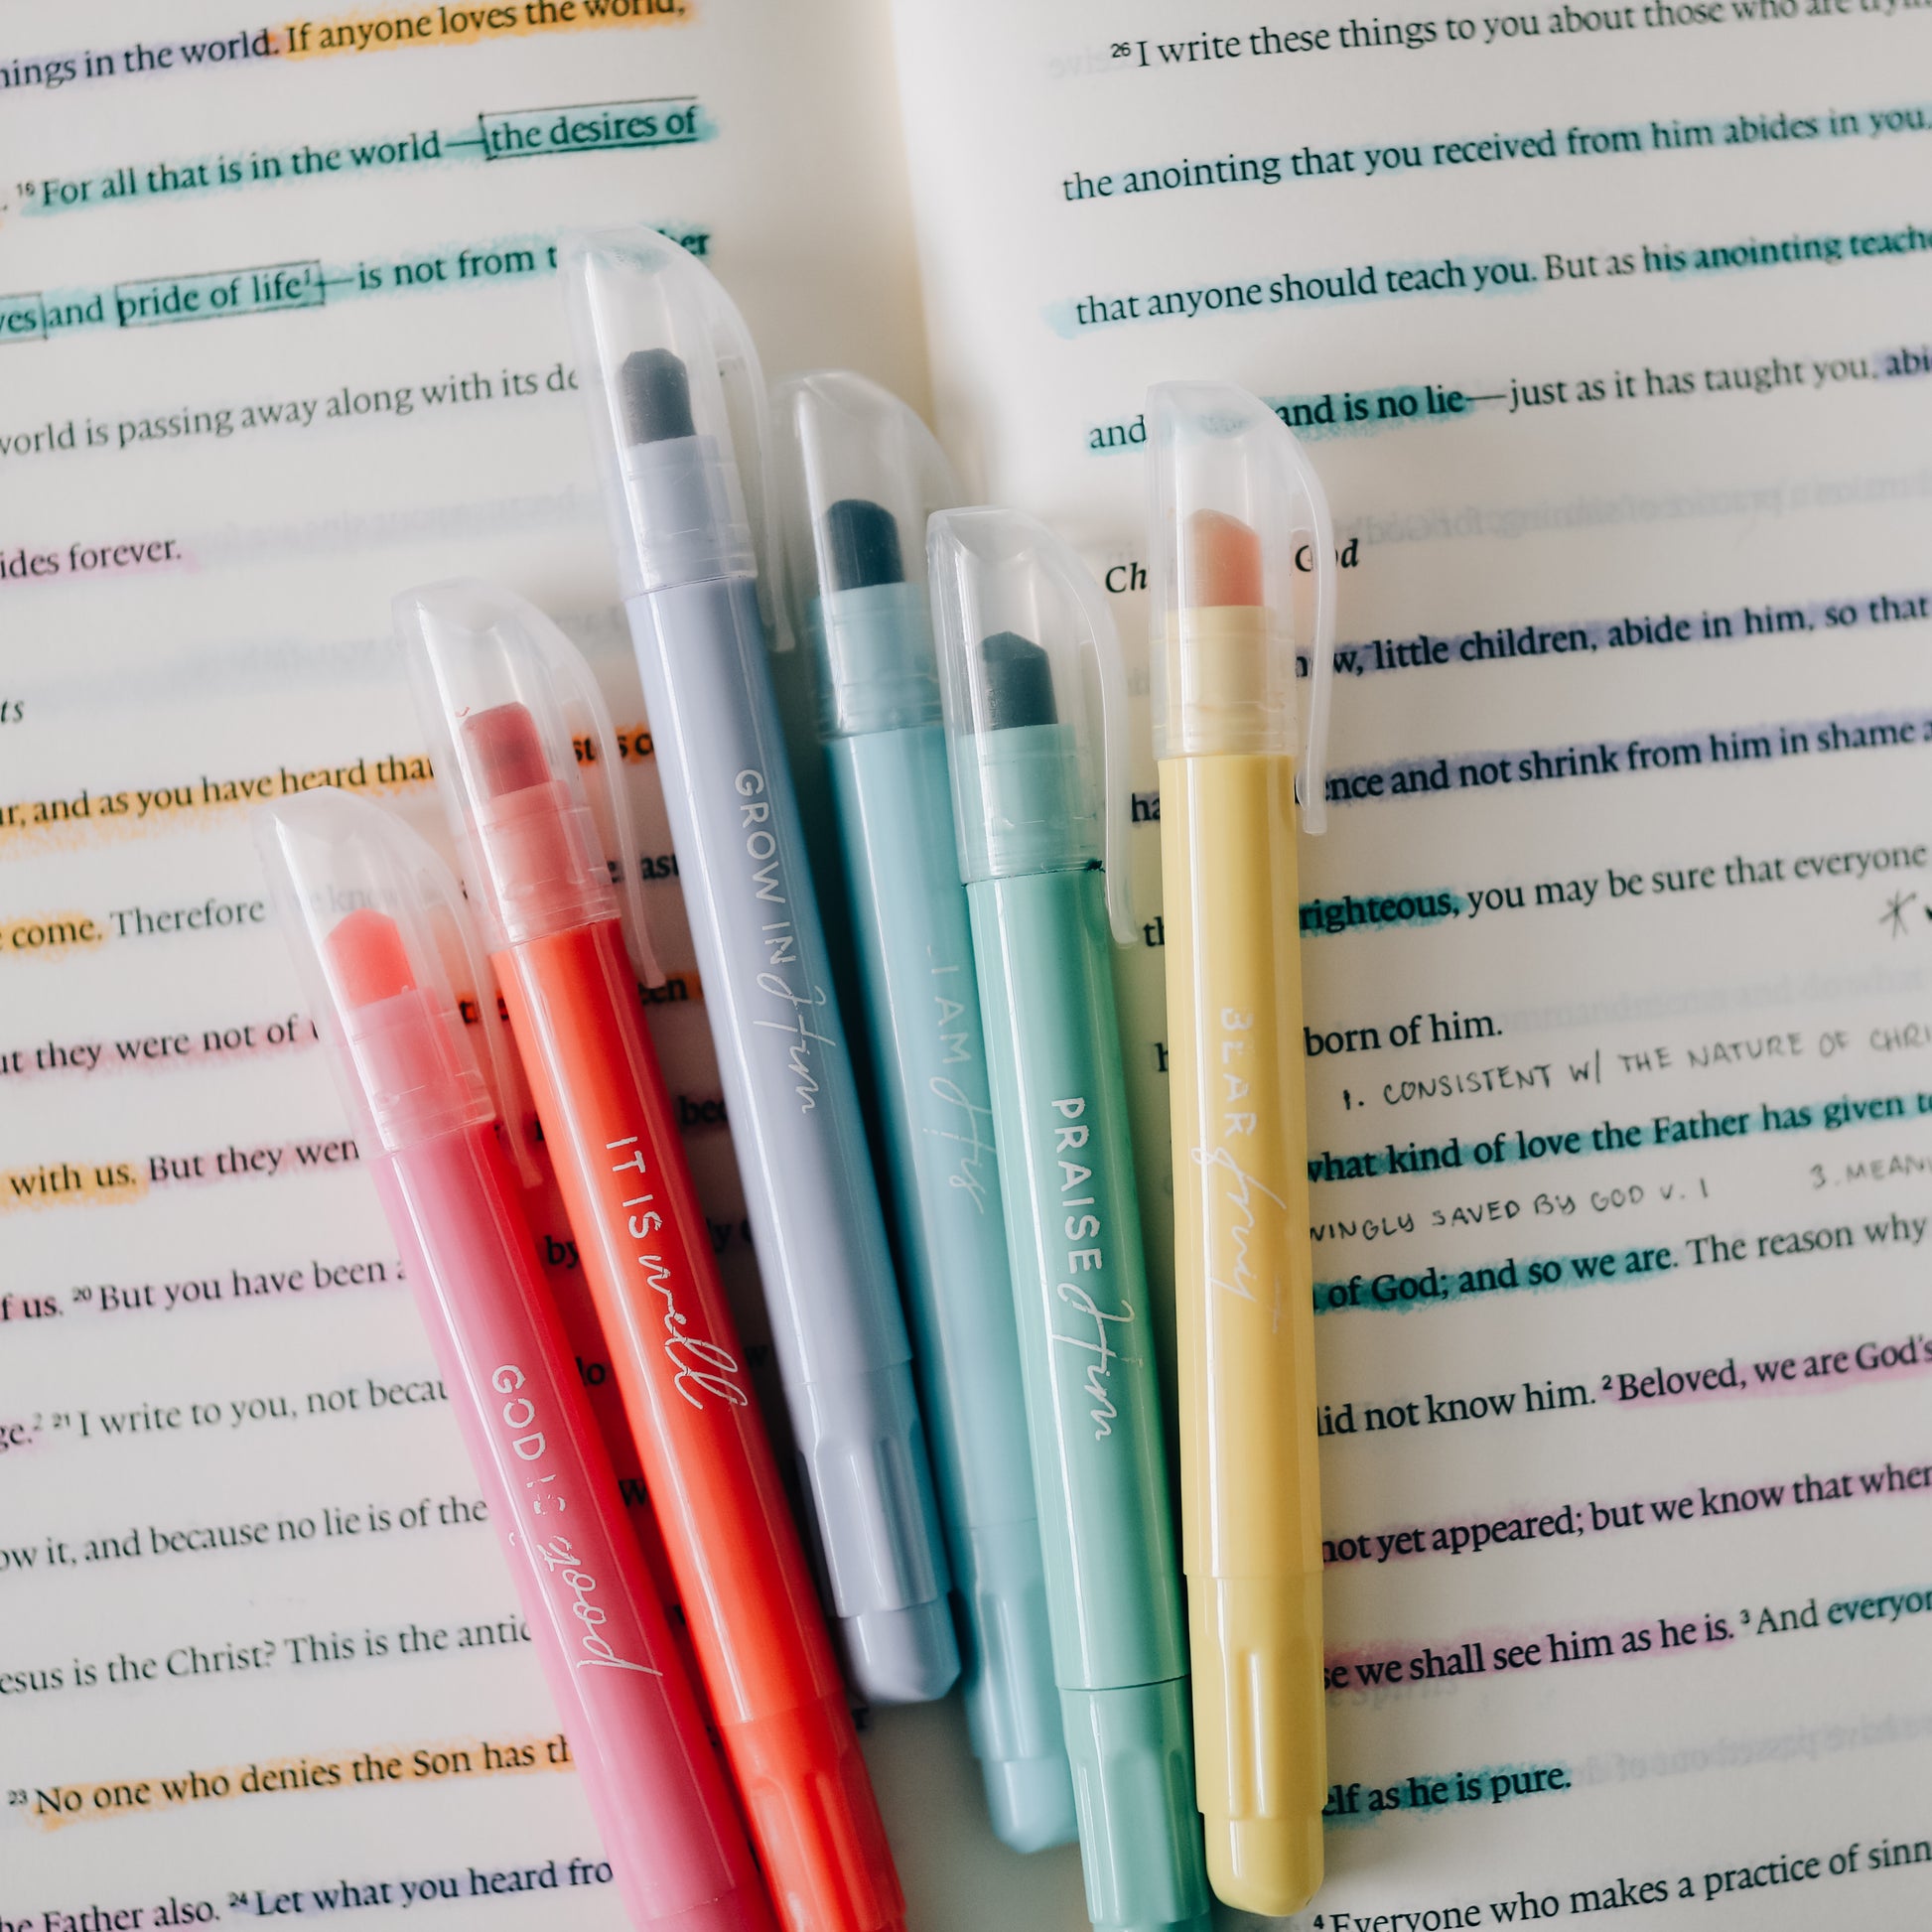 Cute Cherished Reflections: Red & Pink Marbled Bible Tabs & Pastel  Highlighters